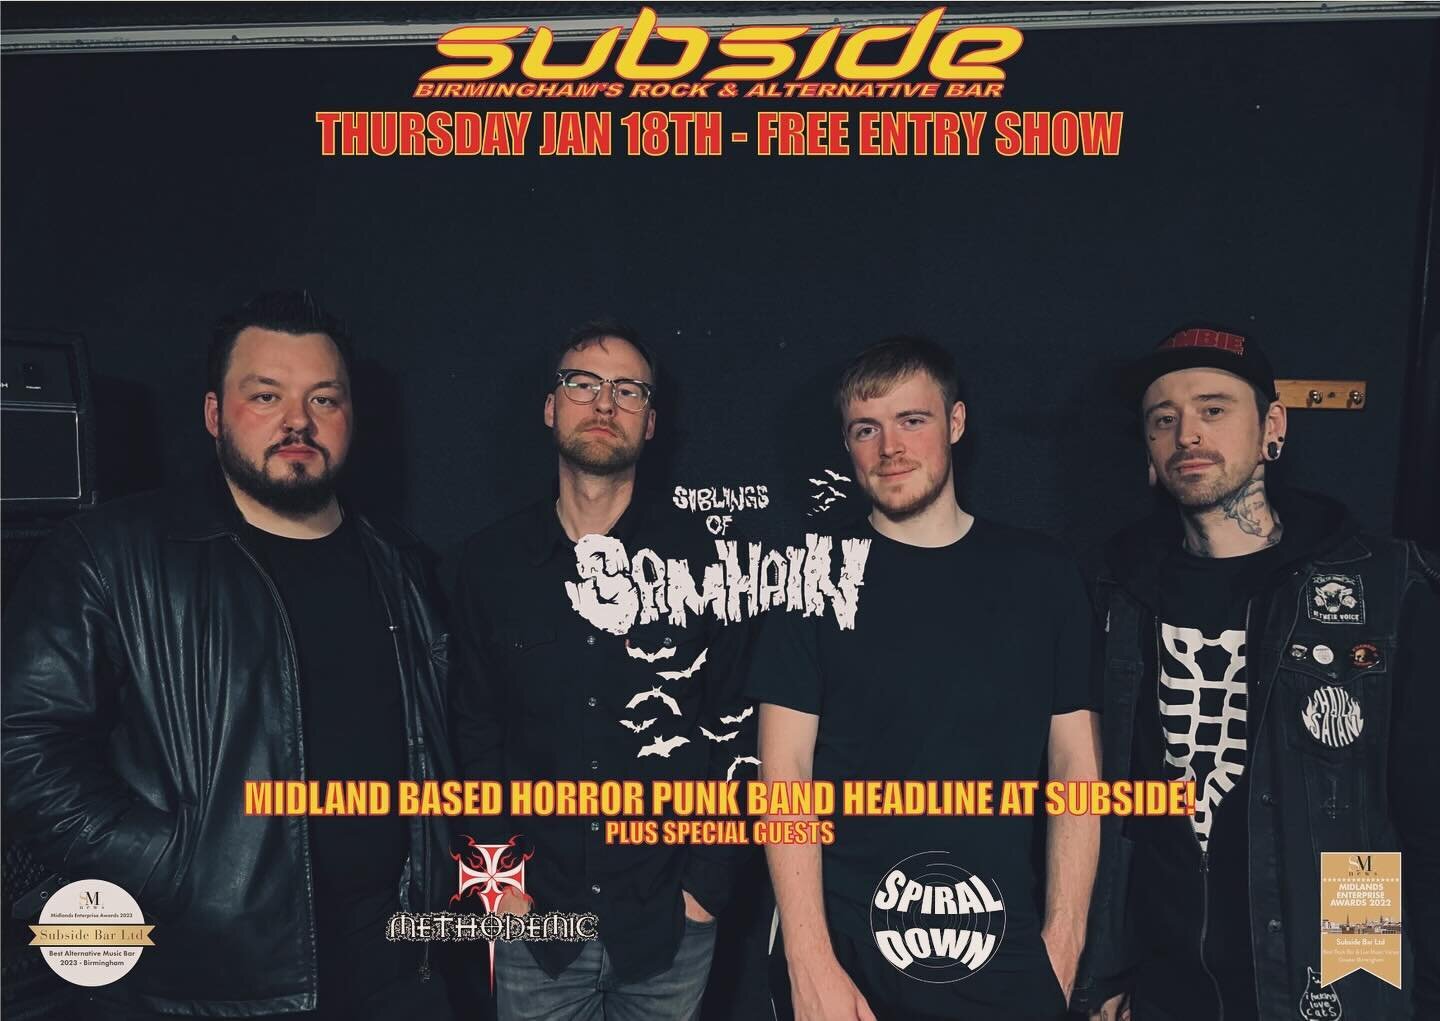 New gig alert!
We will be playing subside on the 18th Jan with @siblingsofsamhain and @spiraldown_ukhc so come on down and show your support and it&rsquo;s free! Who doesn&rsquo;t love a freebie
-
-
#gig #livemusic #birmingham #subside #concert #bass